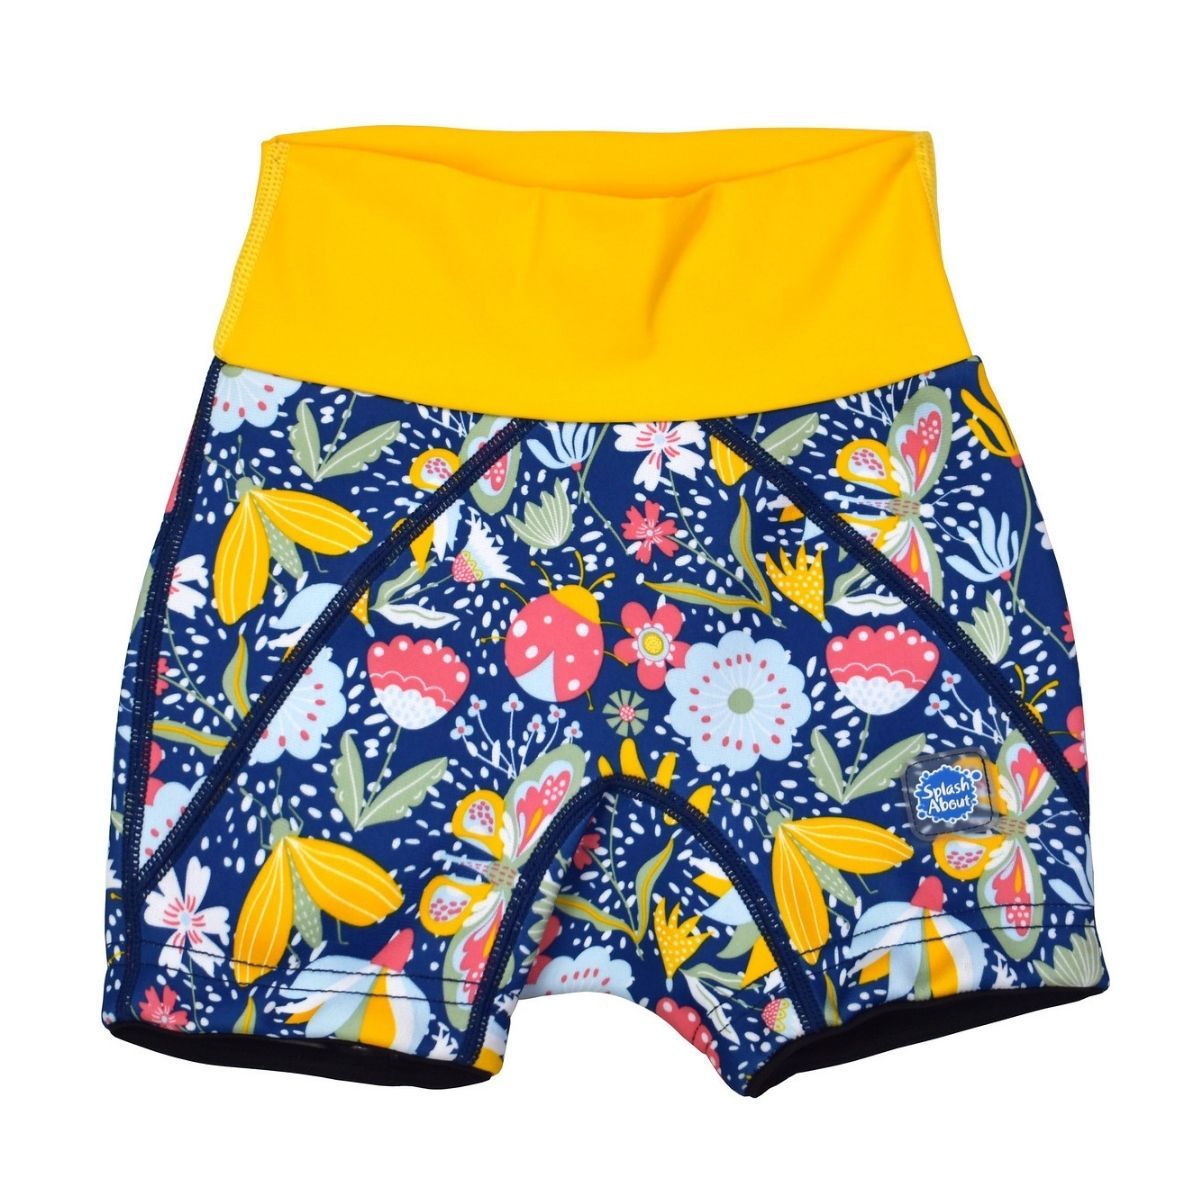 Neoprene swim shorts in navy blue with yellow waist and floral print. Front.